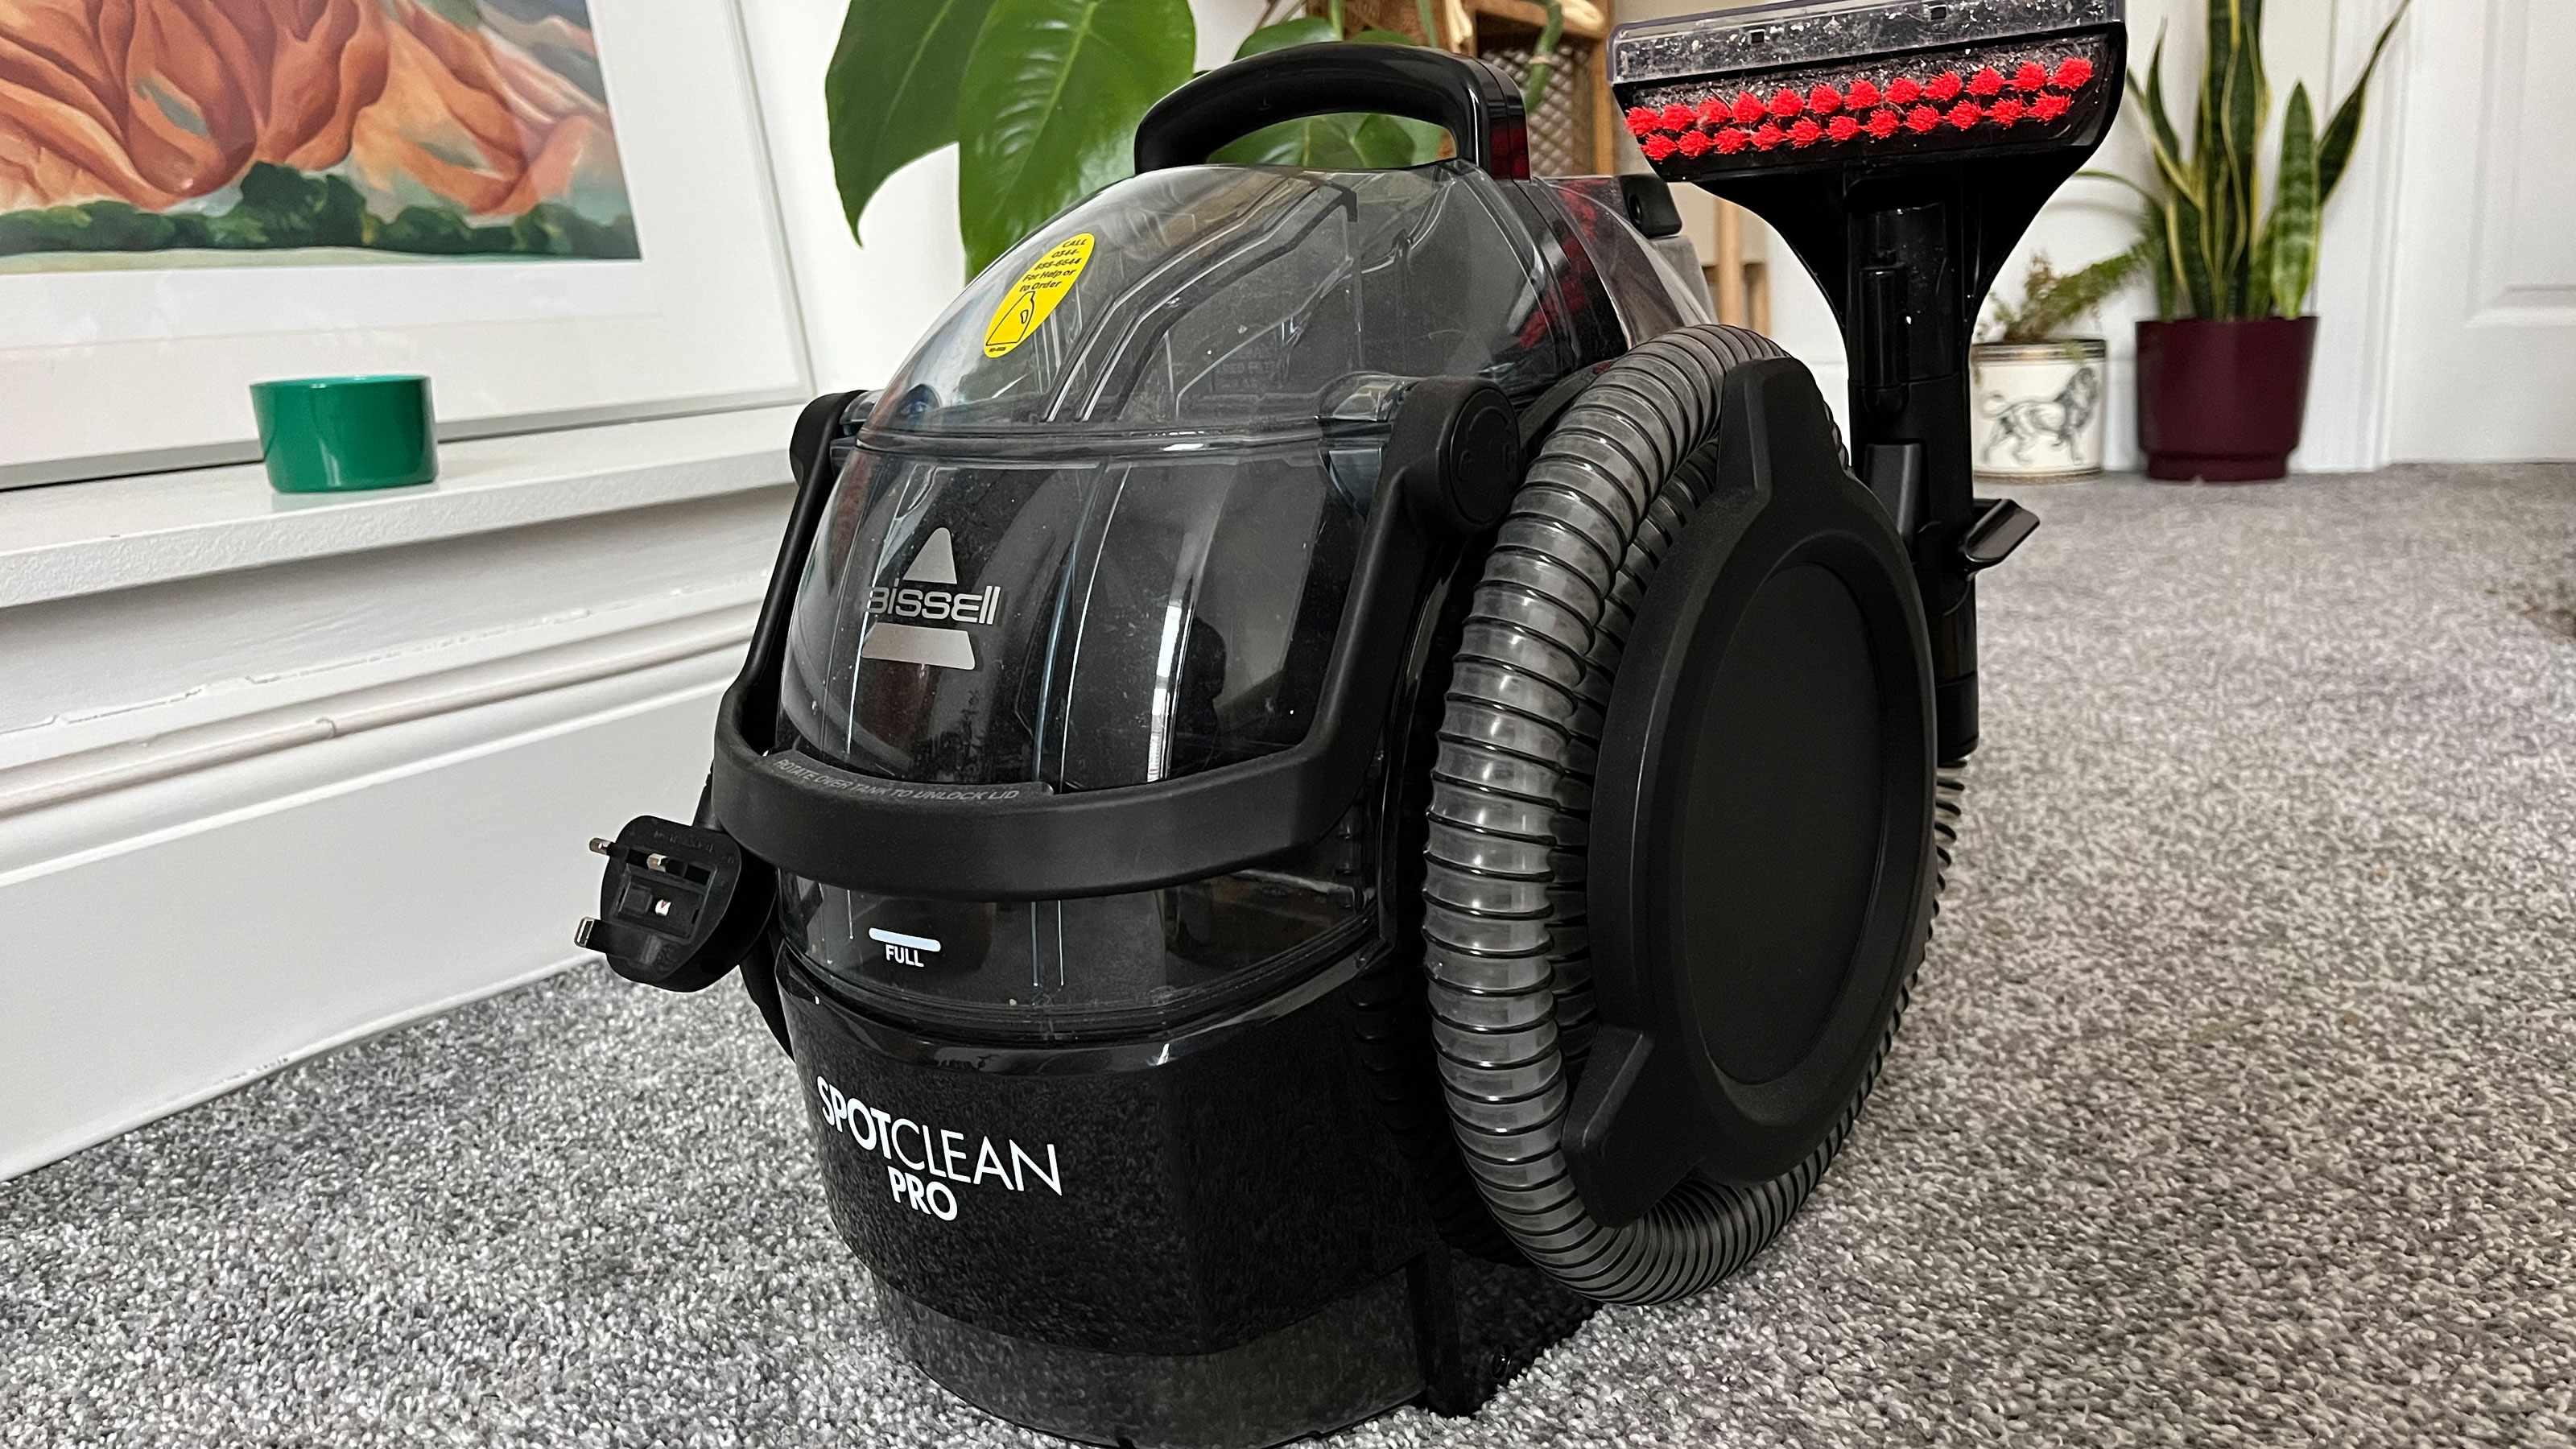 Bissell SpotClean Pro review